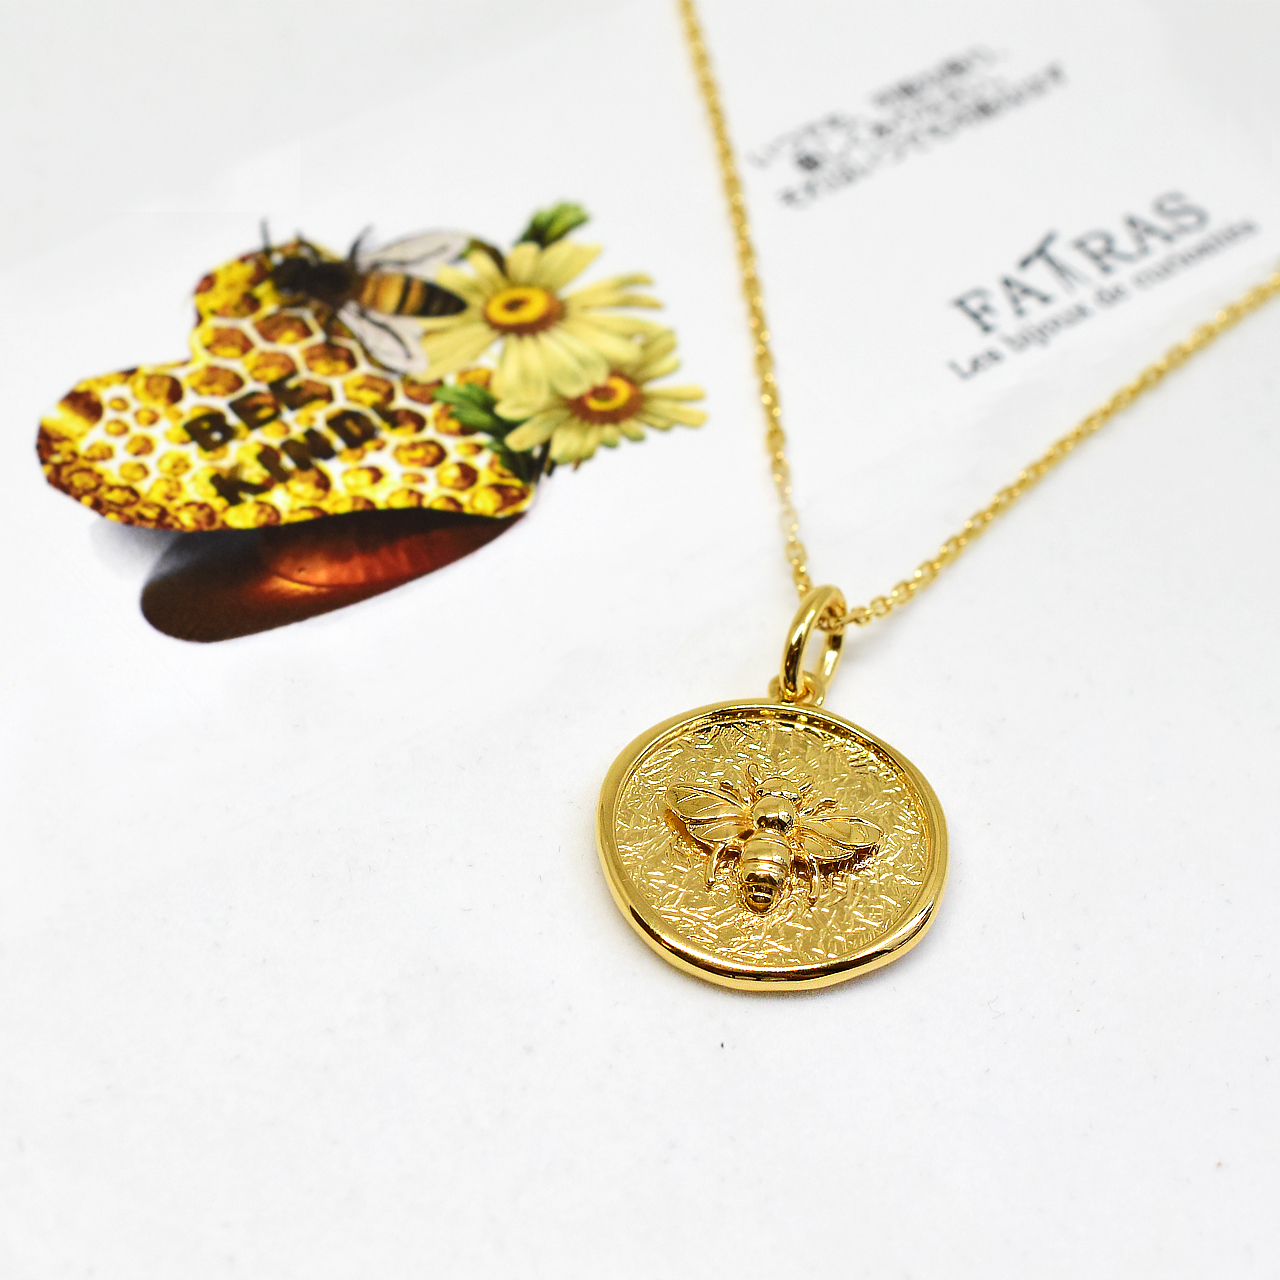 ～2021 FATRAS NEW COLLECTIONS～　【 BEE KIND! 】 ご紹介第三弾